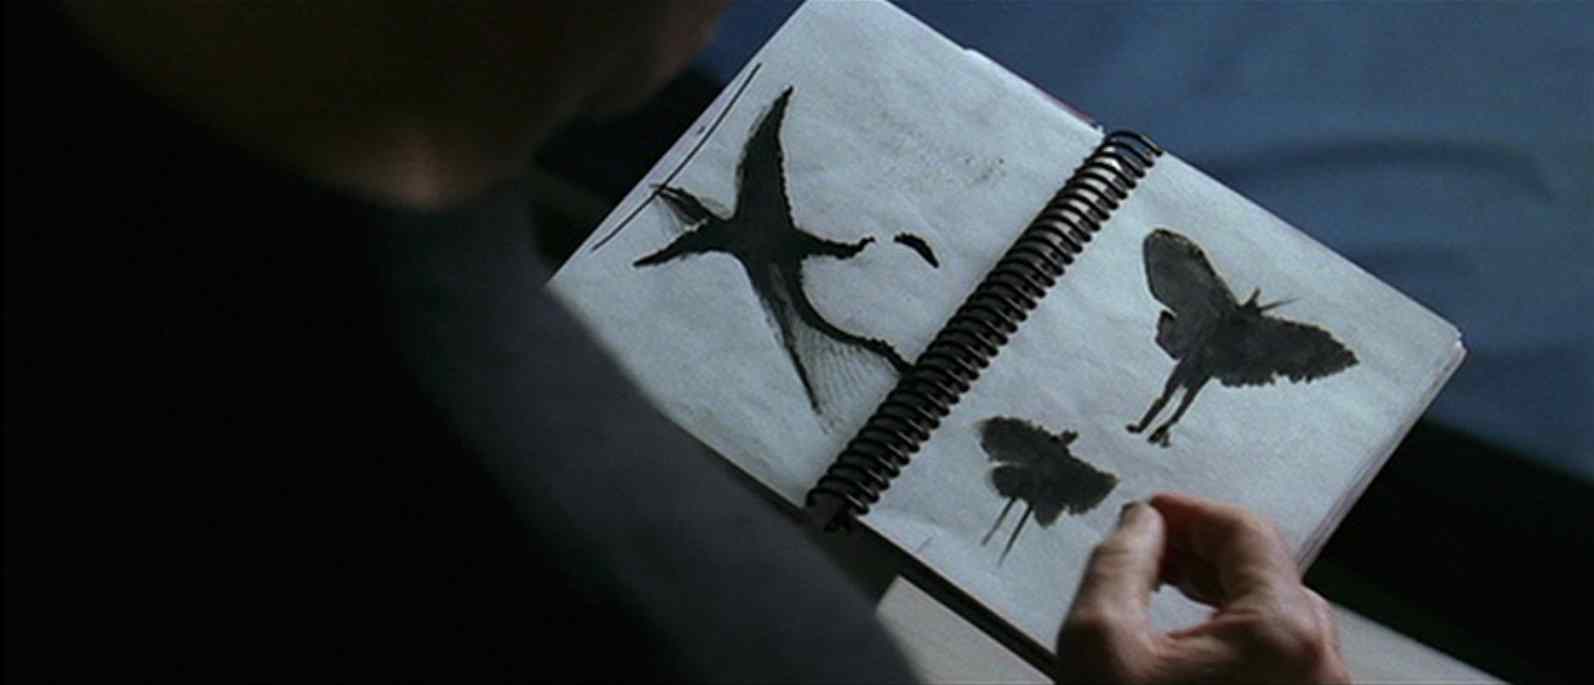 Drawings by what the mothman looks like in the movie starring Richard Gere and Laura Linney.